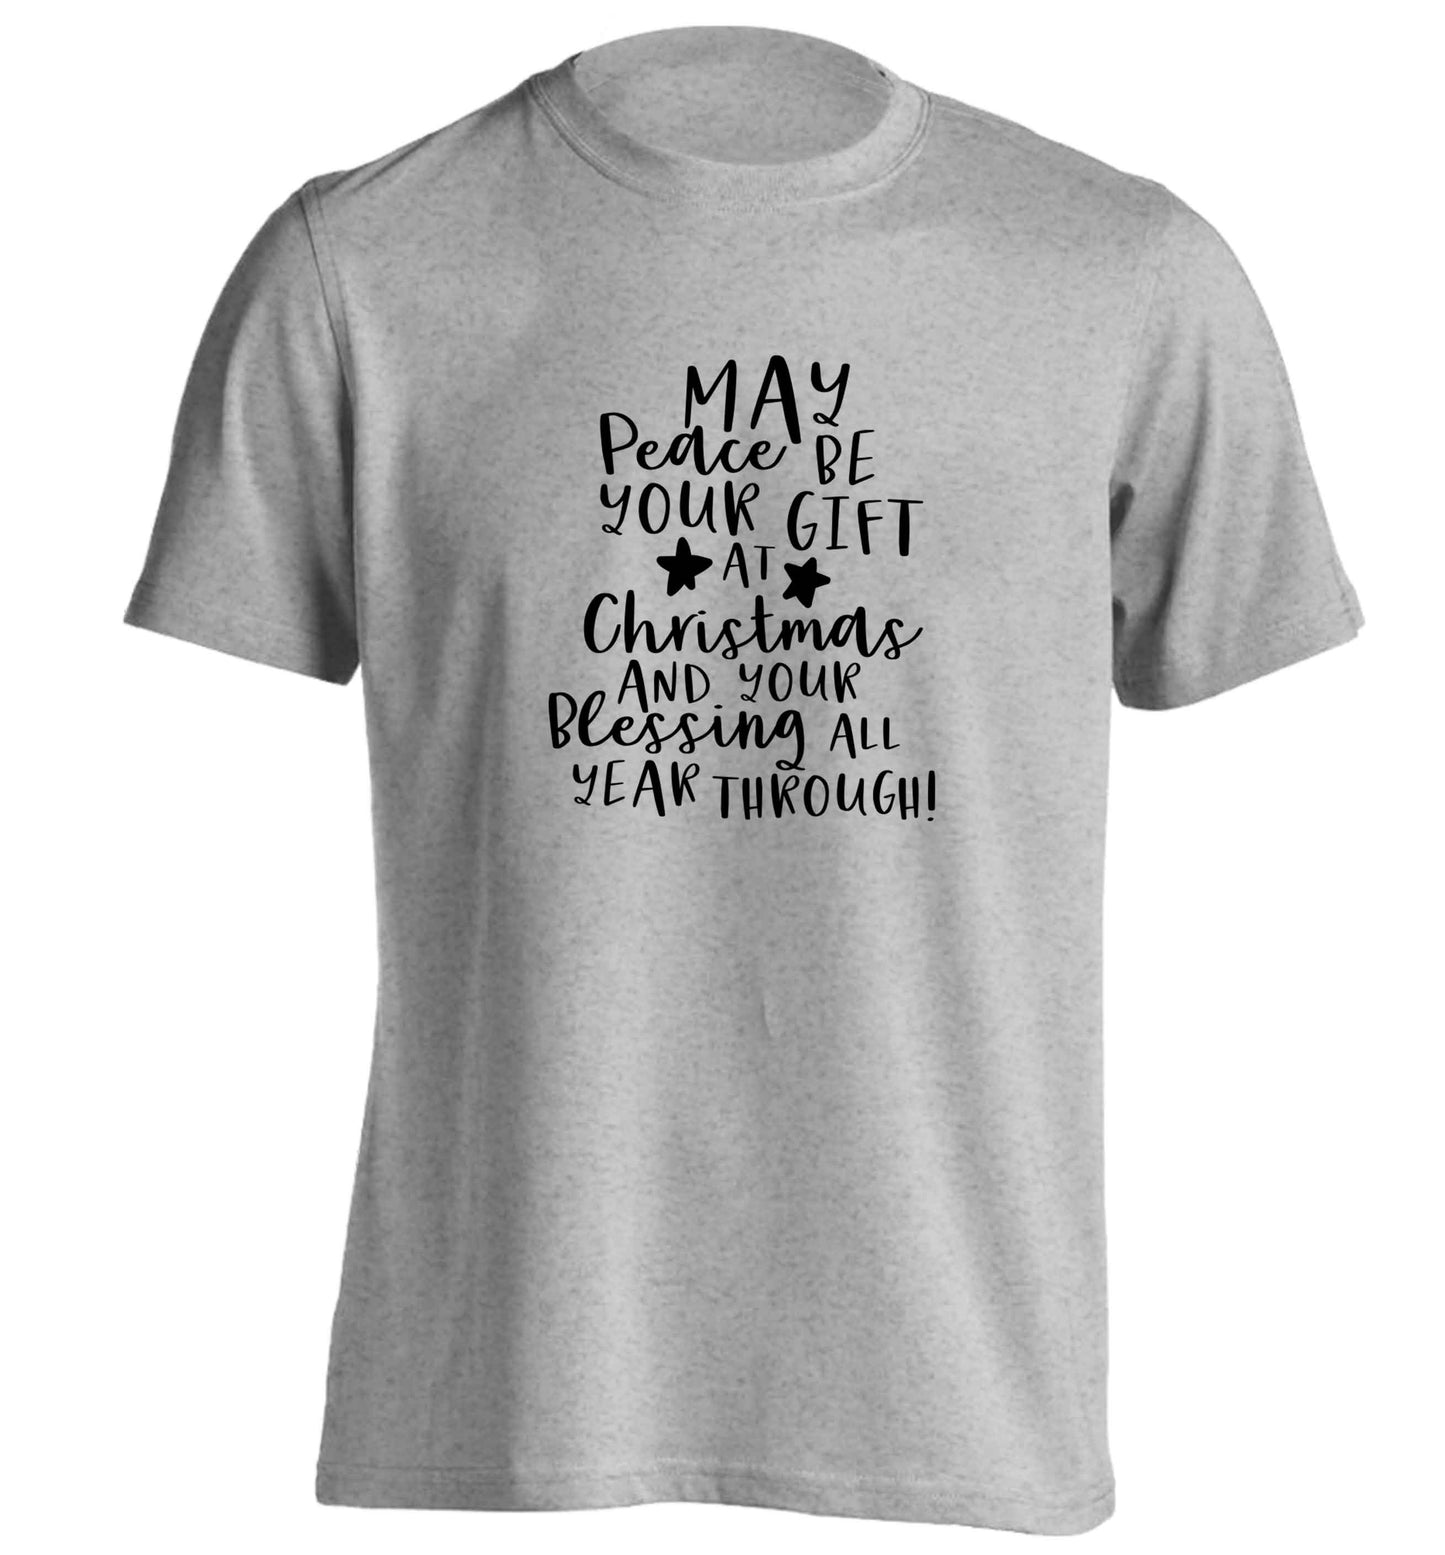 Peace be your Gift at Christmas Gift adults unisex grey Tshirt 2XL